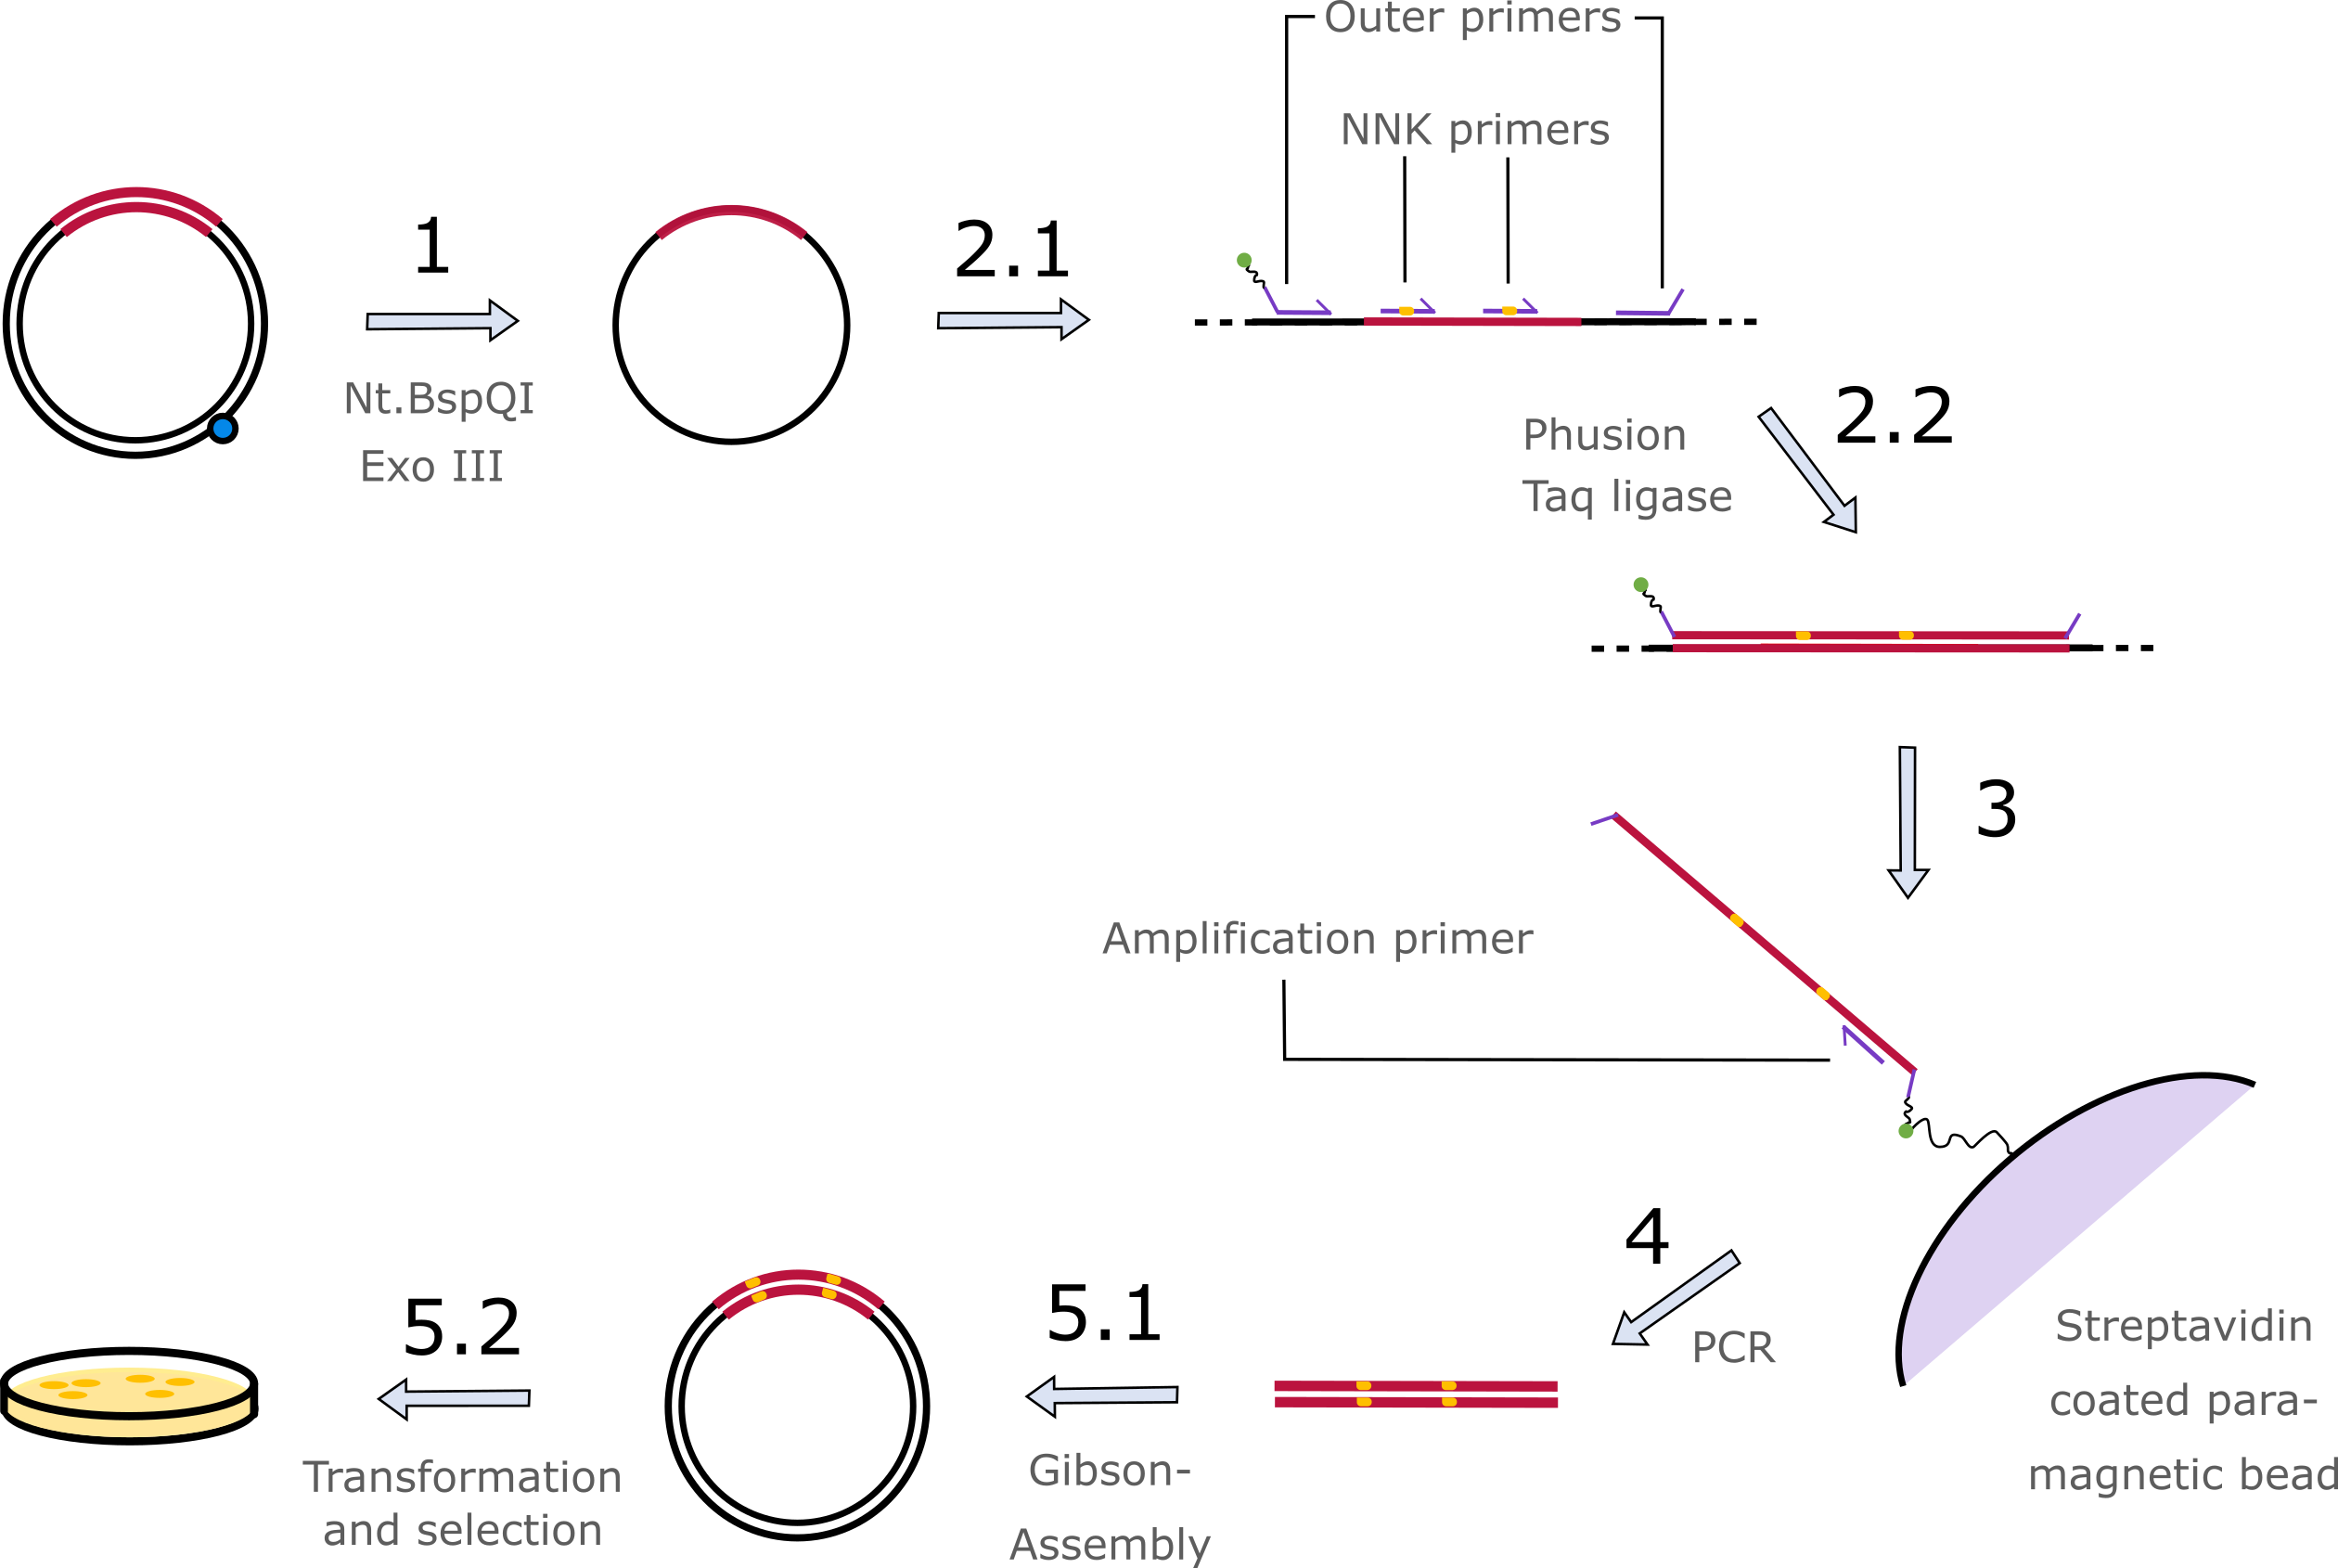 Figure 2: The plasmid pJOE5751.1 (backbone black, RBP-sequence red) is nicked by the nicking endonuclease Nt.BspQI (at the cyan dot) and then digested by Exonuclease III, creating a single strand plasmid.(1) Different oligonucleotides of the same orientation bind at the ssplasmid (2.1), complementary fragments are created by the Phusion polymerase and ligated by the Taq ligase (2.2). The 5´-biotin labeled end of the created single strand binds streptavidin coated paramagnetic beads (3) and the fragments are amplified using PCR (4). The double stranded fragments are then cloned into a pJOE5751.1 backbone via Gibson-Assembly (5.1). The library plasmid is transformed into E. coli that contain the signaling cascade plasmid with an antibiotic resistance instead of GFP, harboring a selection system to receive only functional mutants (5.2).